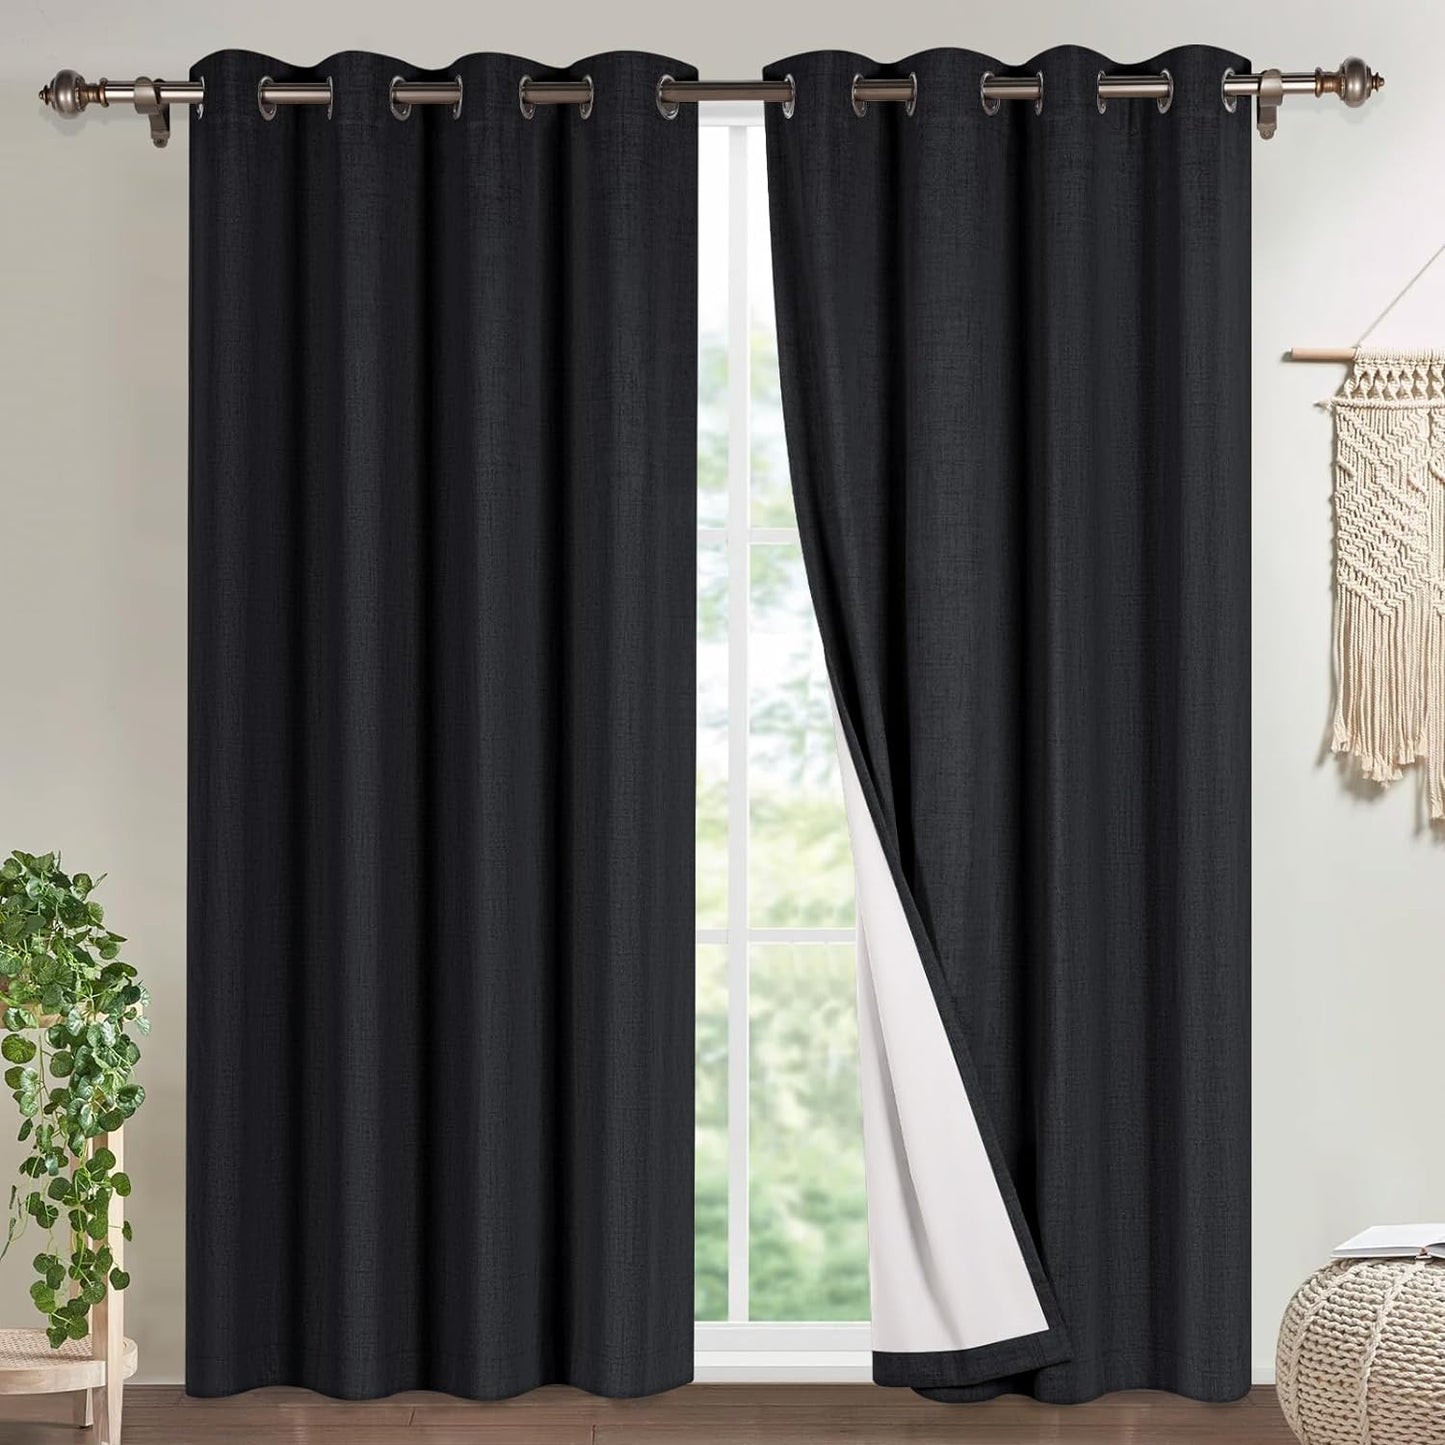 Timeles 100% Blackout Window Curtains 84 Inch Length for Living Room Textured Linen Curtains Sliver Grommet Pinch Pleated Room Darkening Curtain with White Liner/Ties(2 Panel W52 X L84, Ivory)  Timeles Black W52" X L96" 